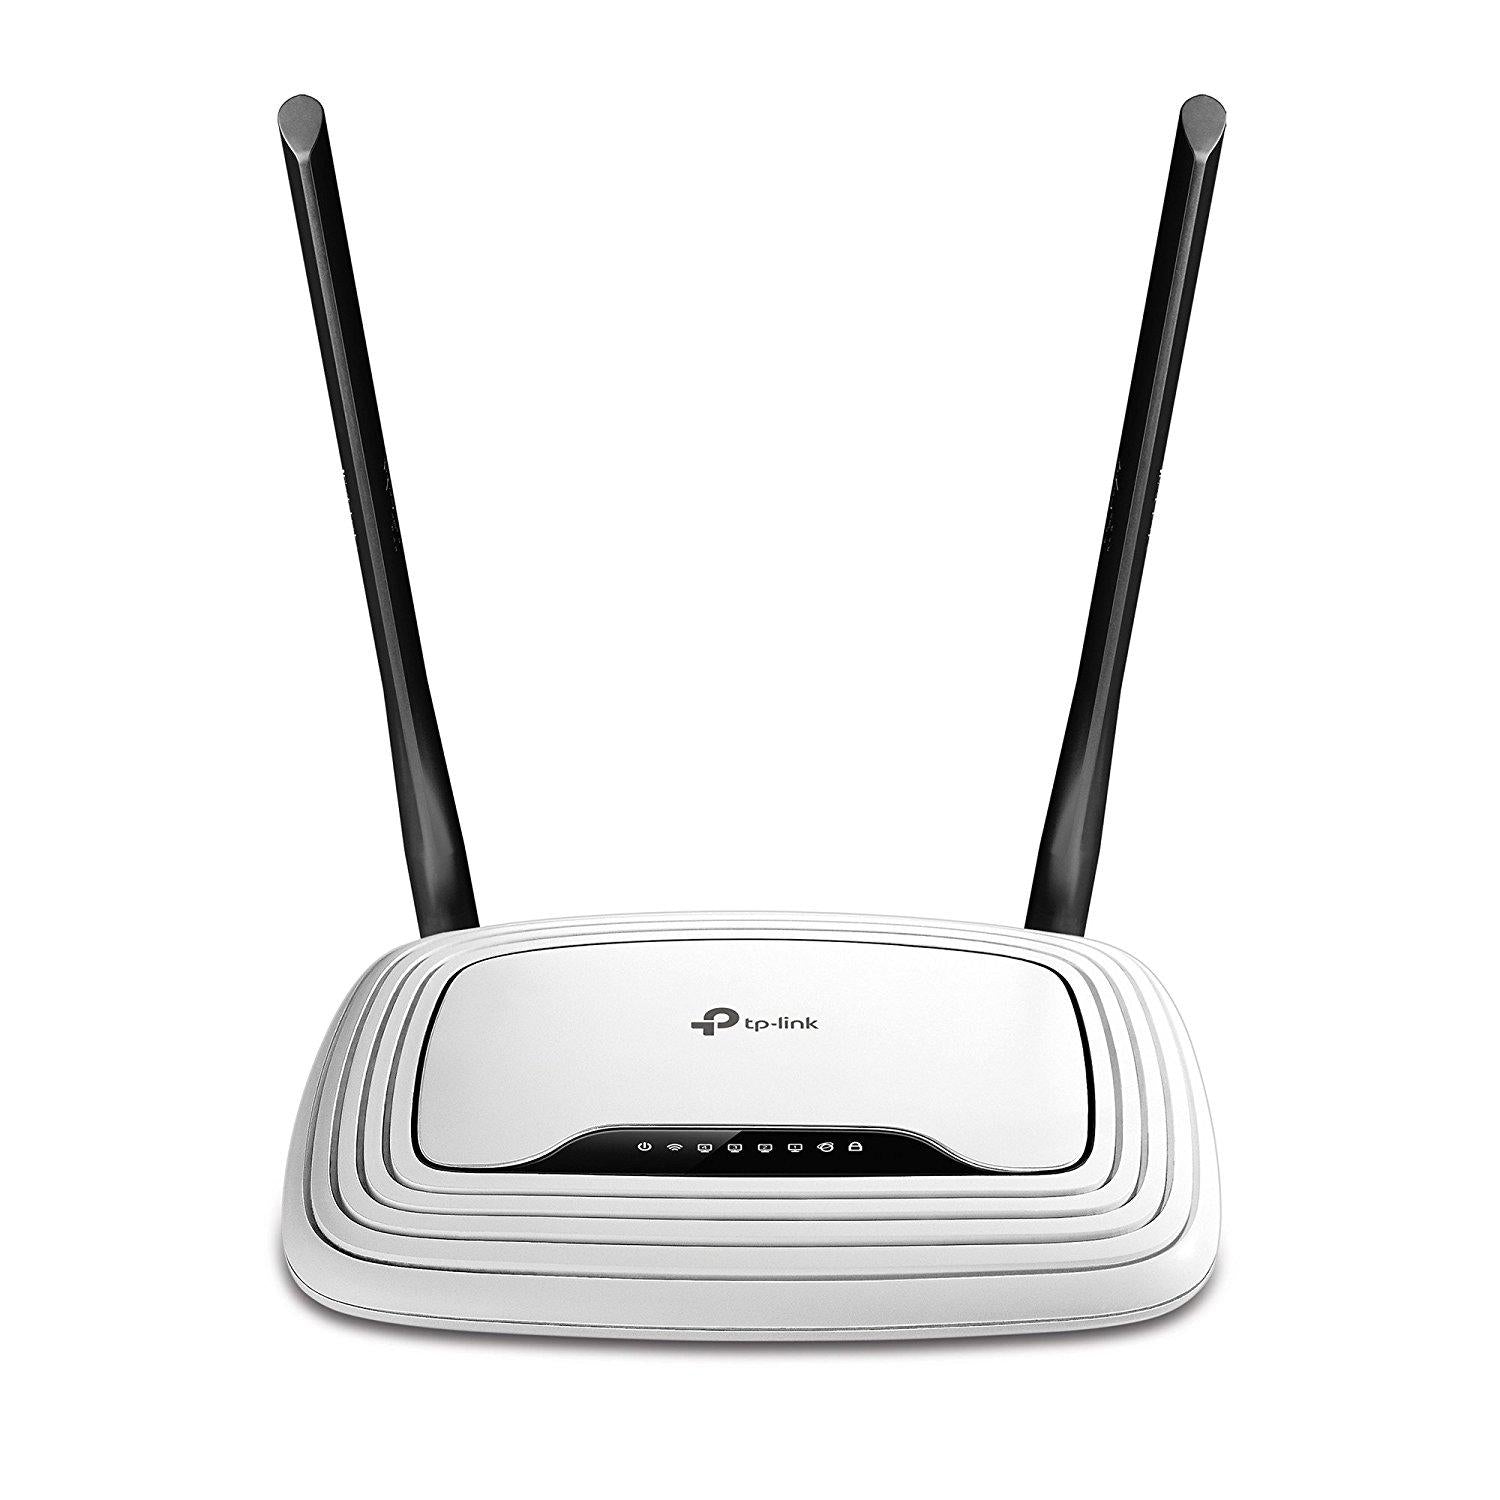 TP-LINK TL-WR841N Single-band (2.4 GHz) Fast Ethernet Black, White wireless router - V&L Canada